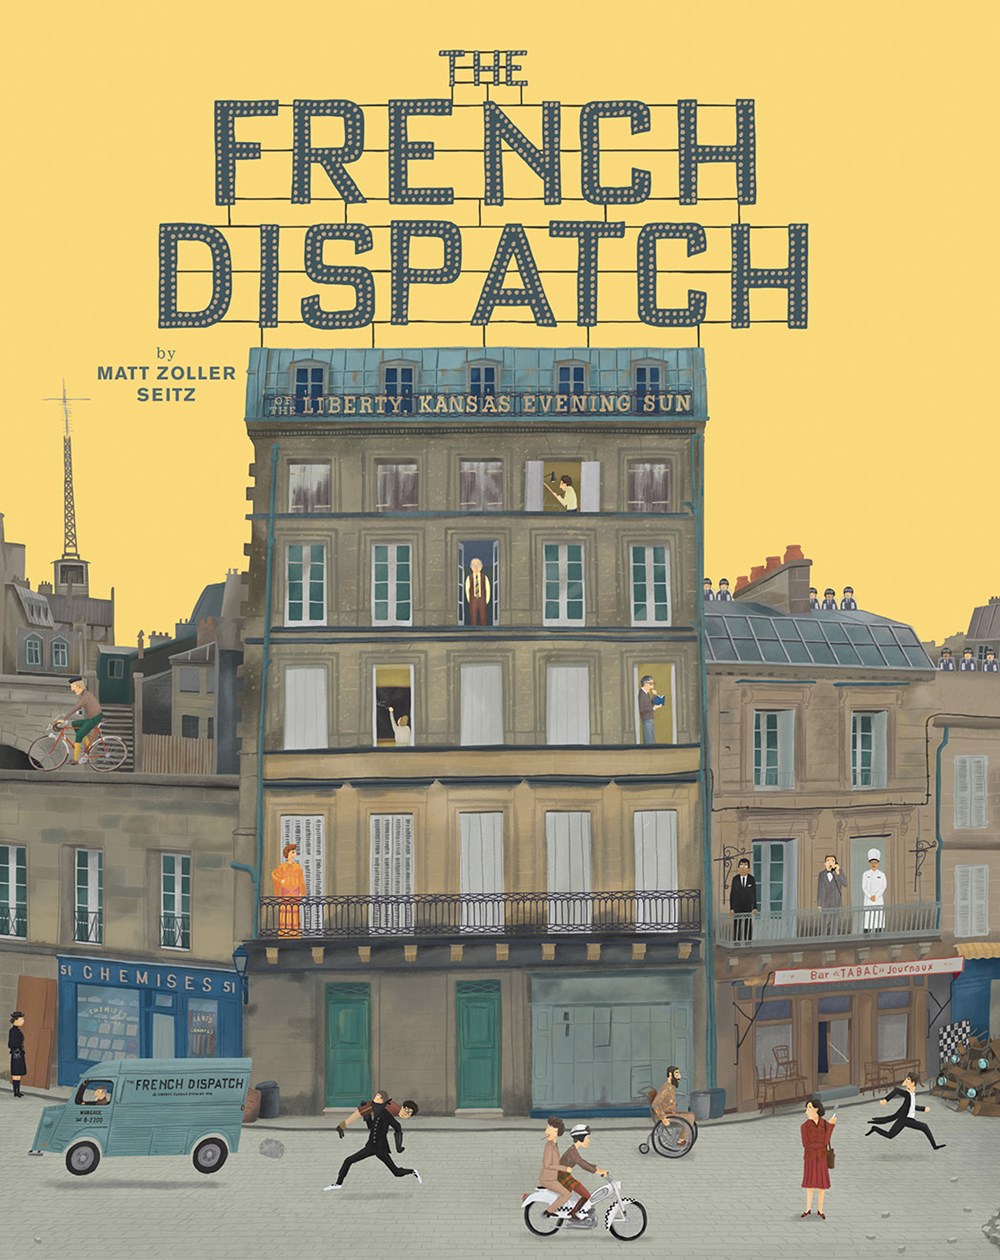 The French Dispatch (Wes Anderson Collection)